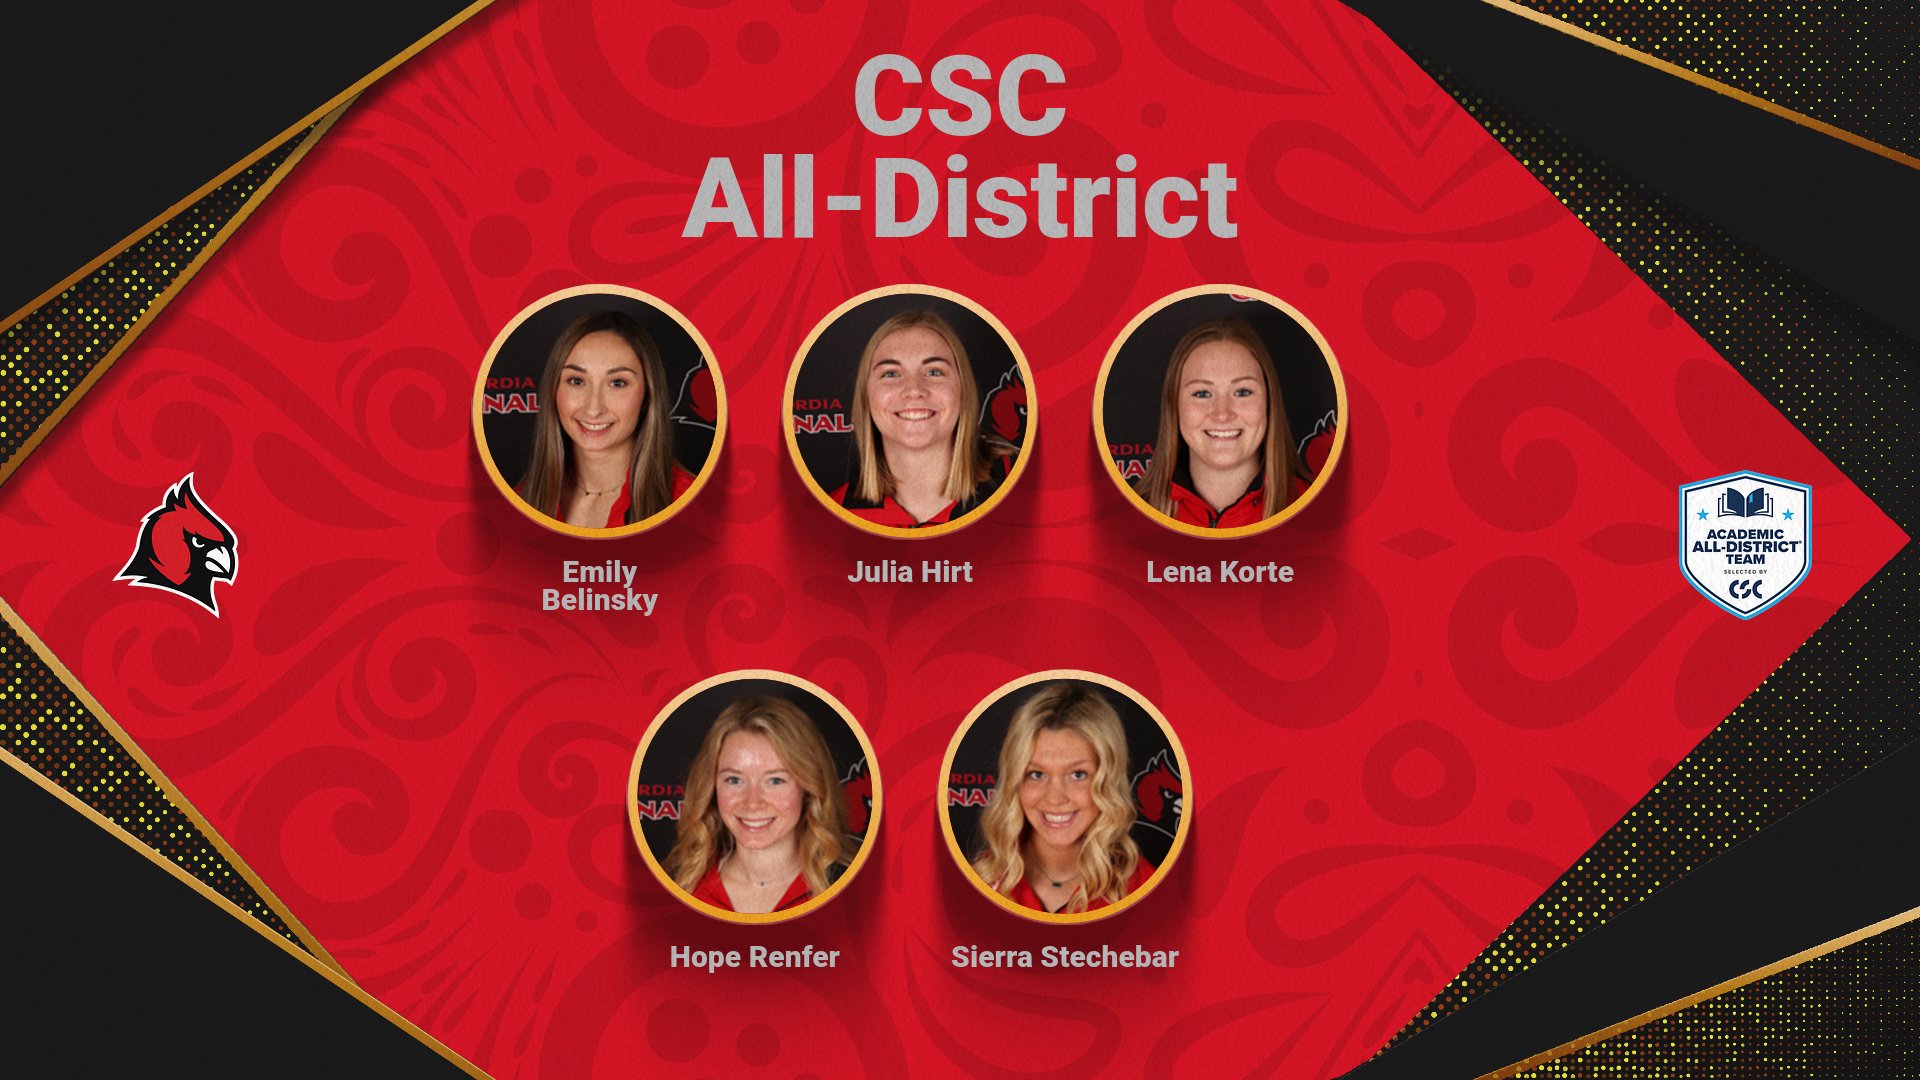 Track see's 5 named to CSC All-District Team